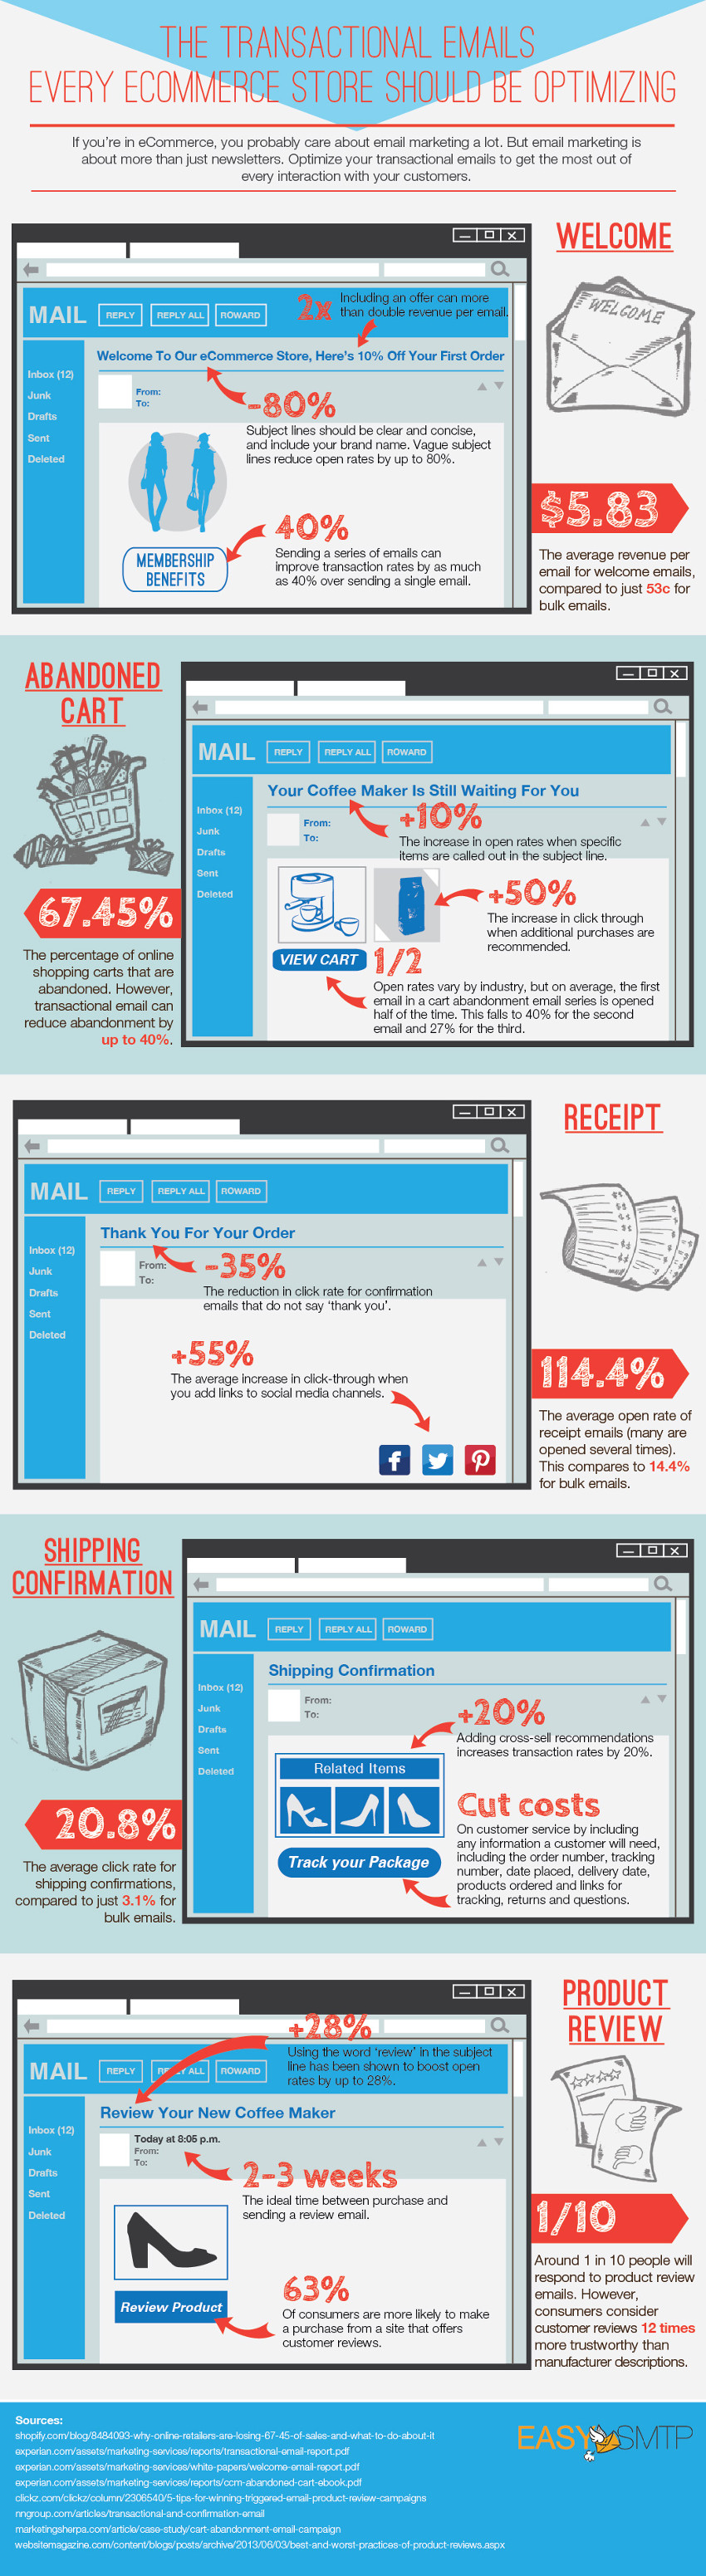 Transactional emails in ecommece infographic